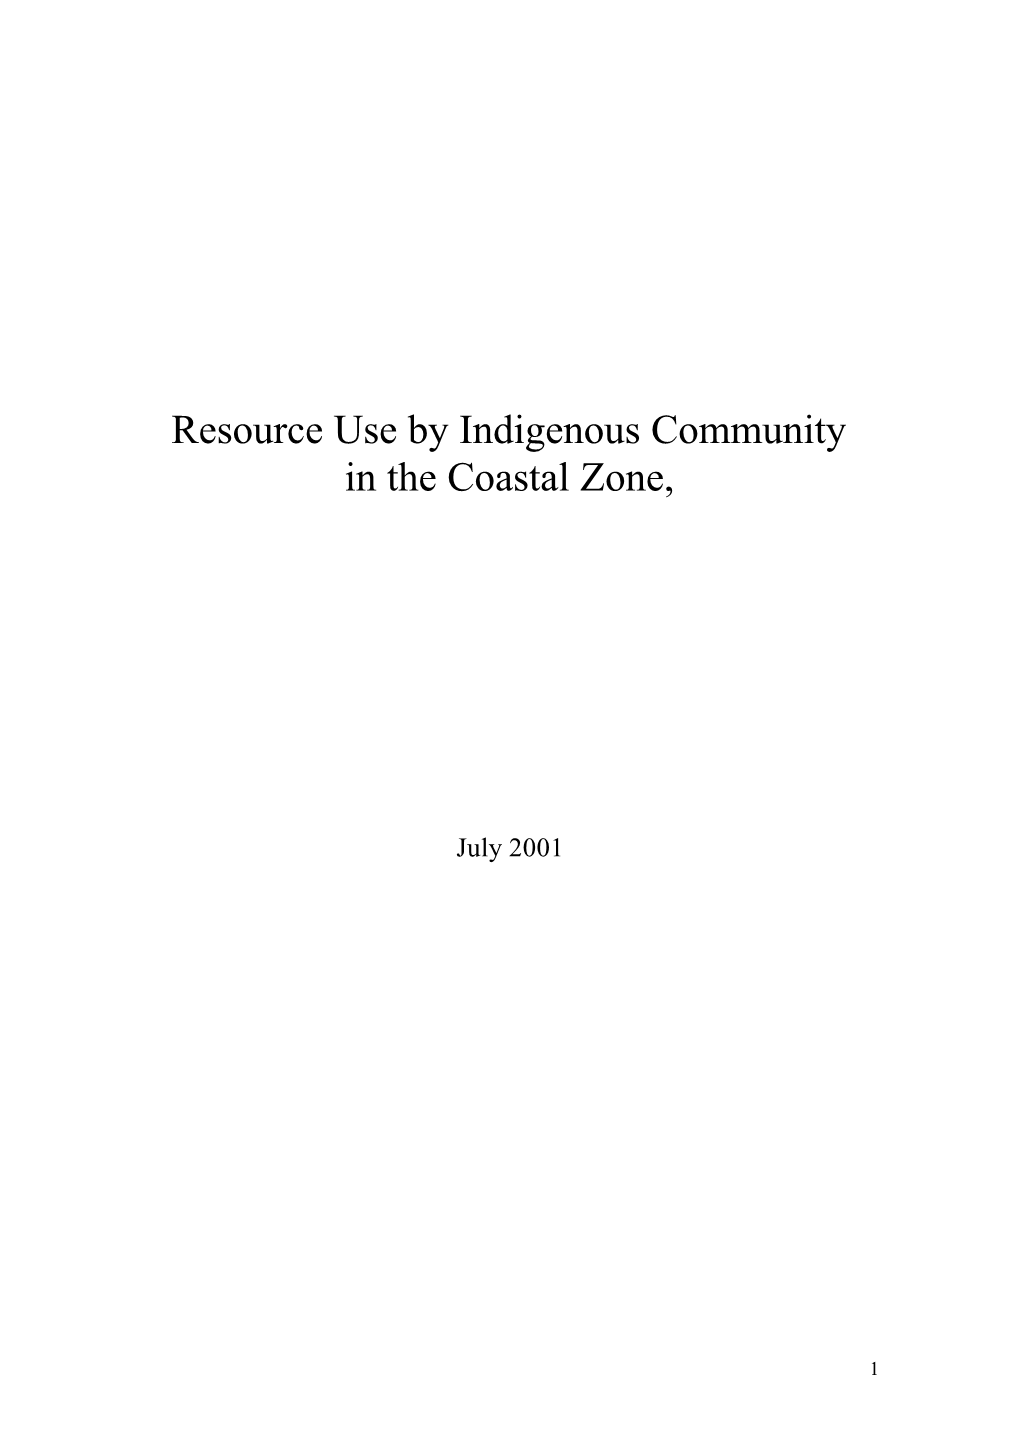 Resource Use by Indigenous Community in the Coastal Zone